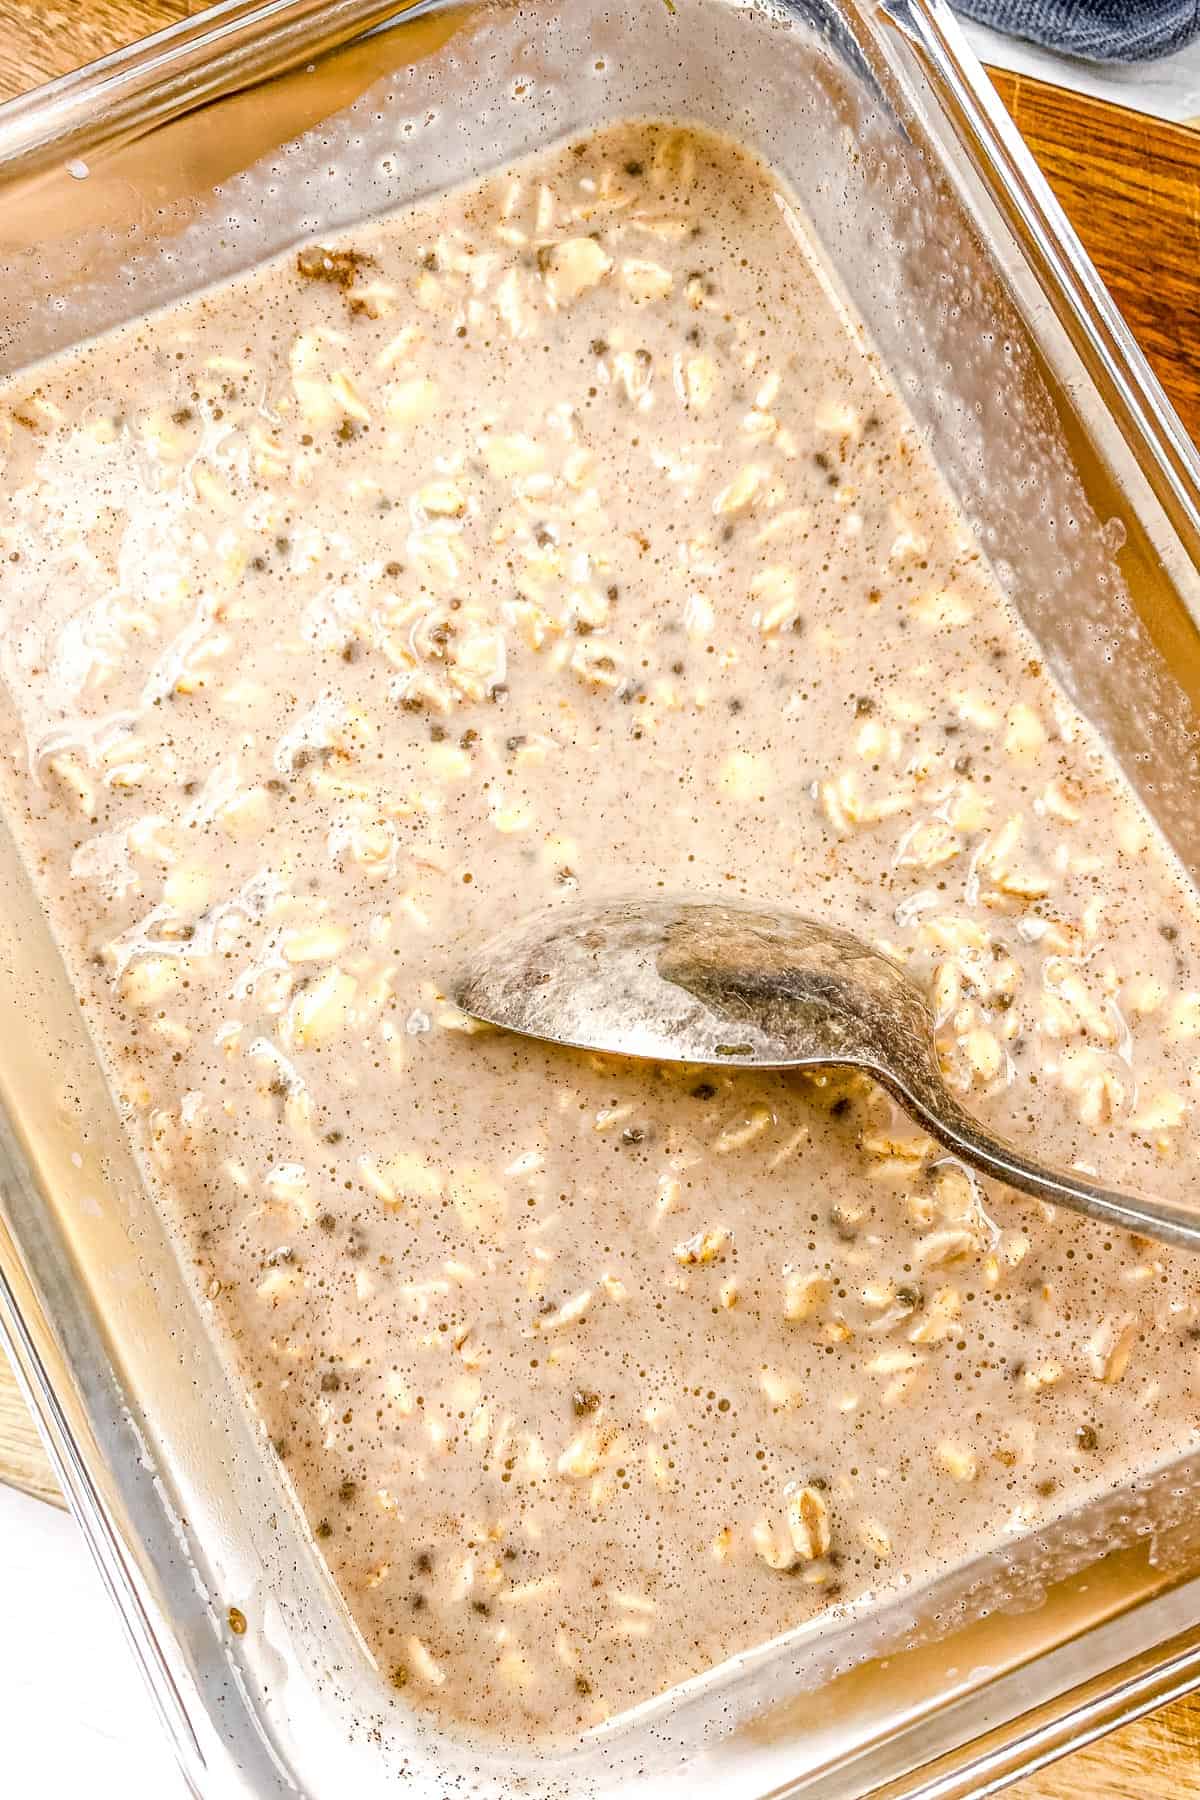 Oats soaking in a glass dish with a metal spoon. 